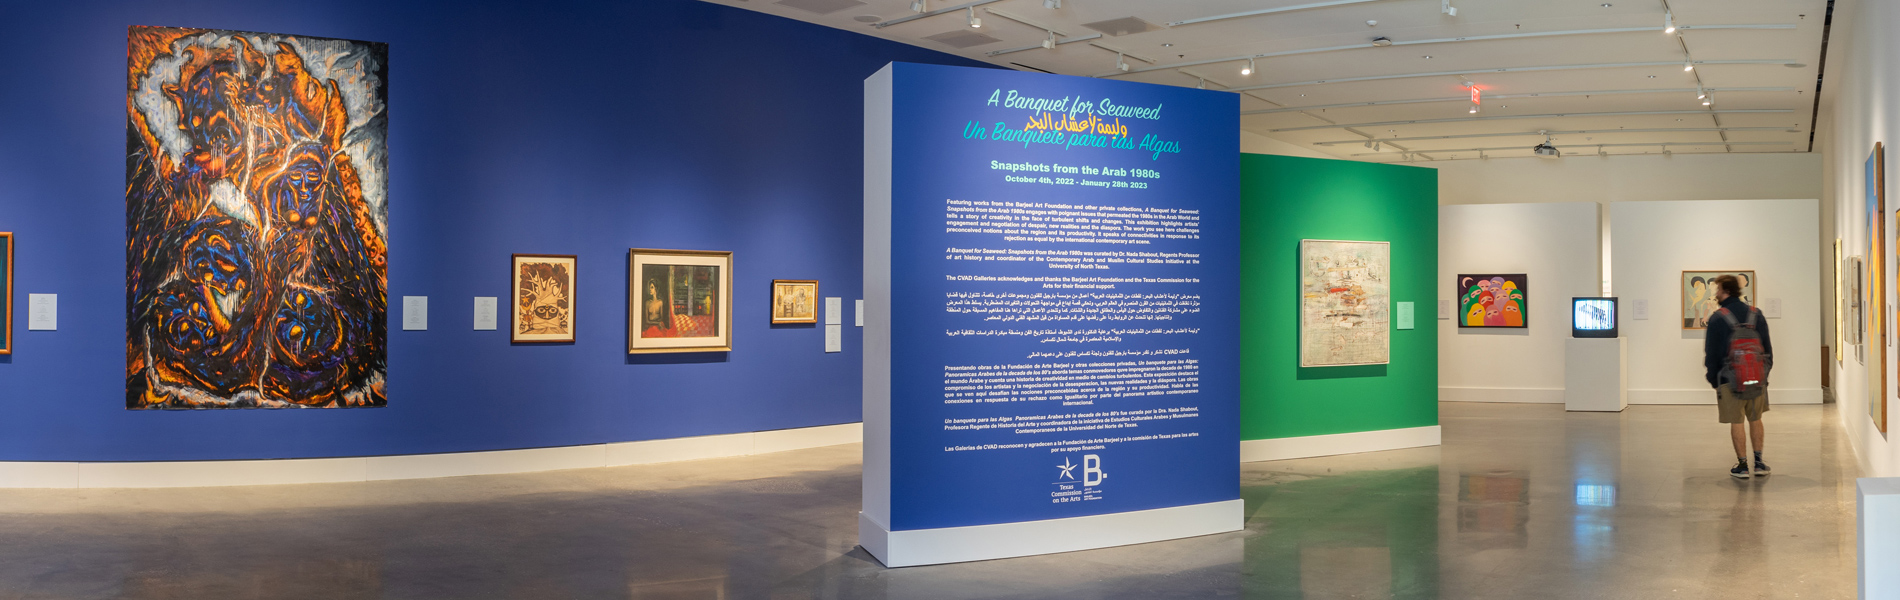 A wide view of the CVAD Gallery with walls painted in blue or green.